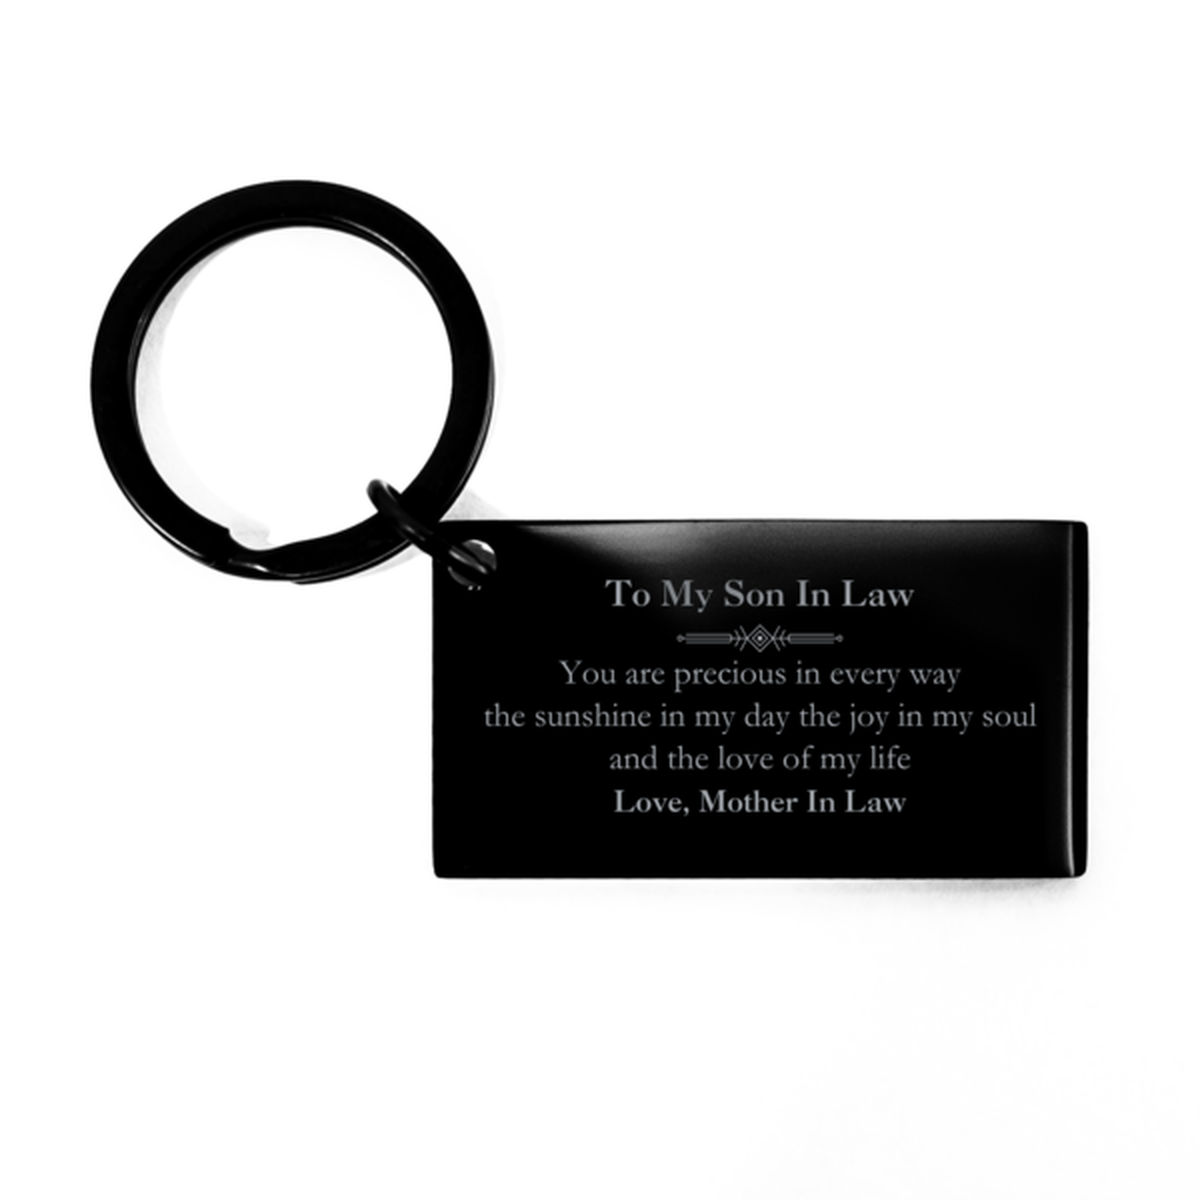 Graduation Gifts for Son In Law Keychain Present from Mother In Law, Christmas Son In Law Birthday Gifts Son In Law You are precious in every way the sunshine in my day. Love, Mother In Law